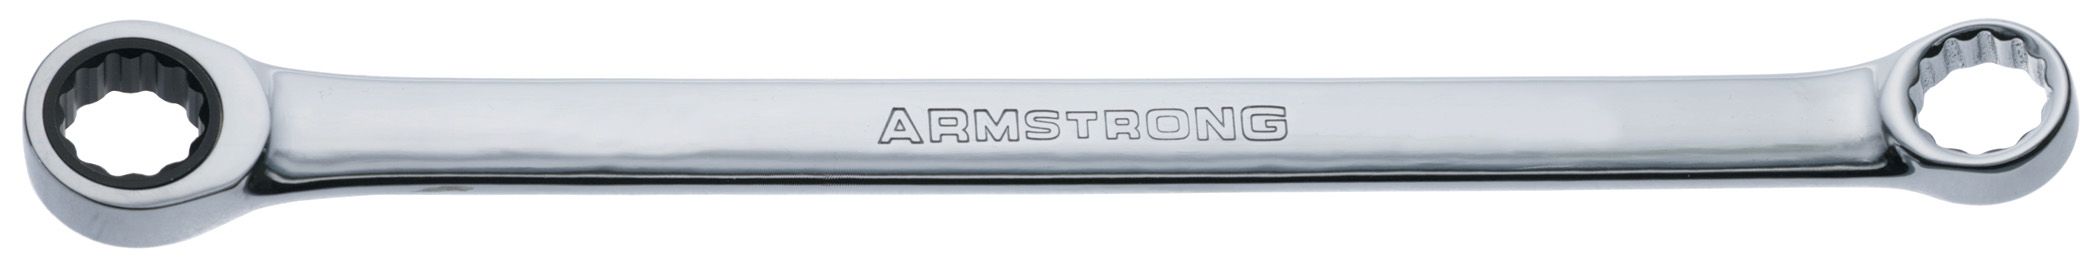 Armstrong 5/8 in. Box Ratcheting Wrench